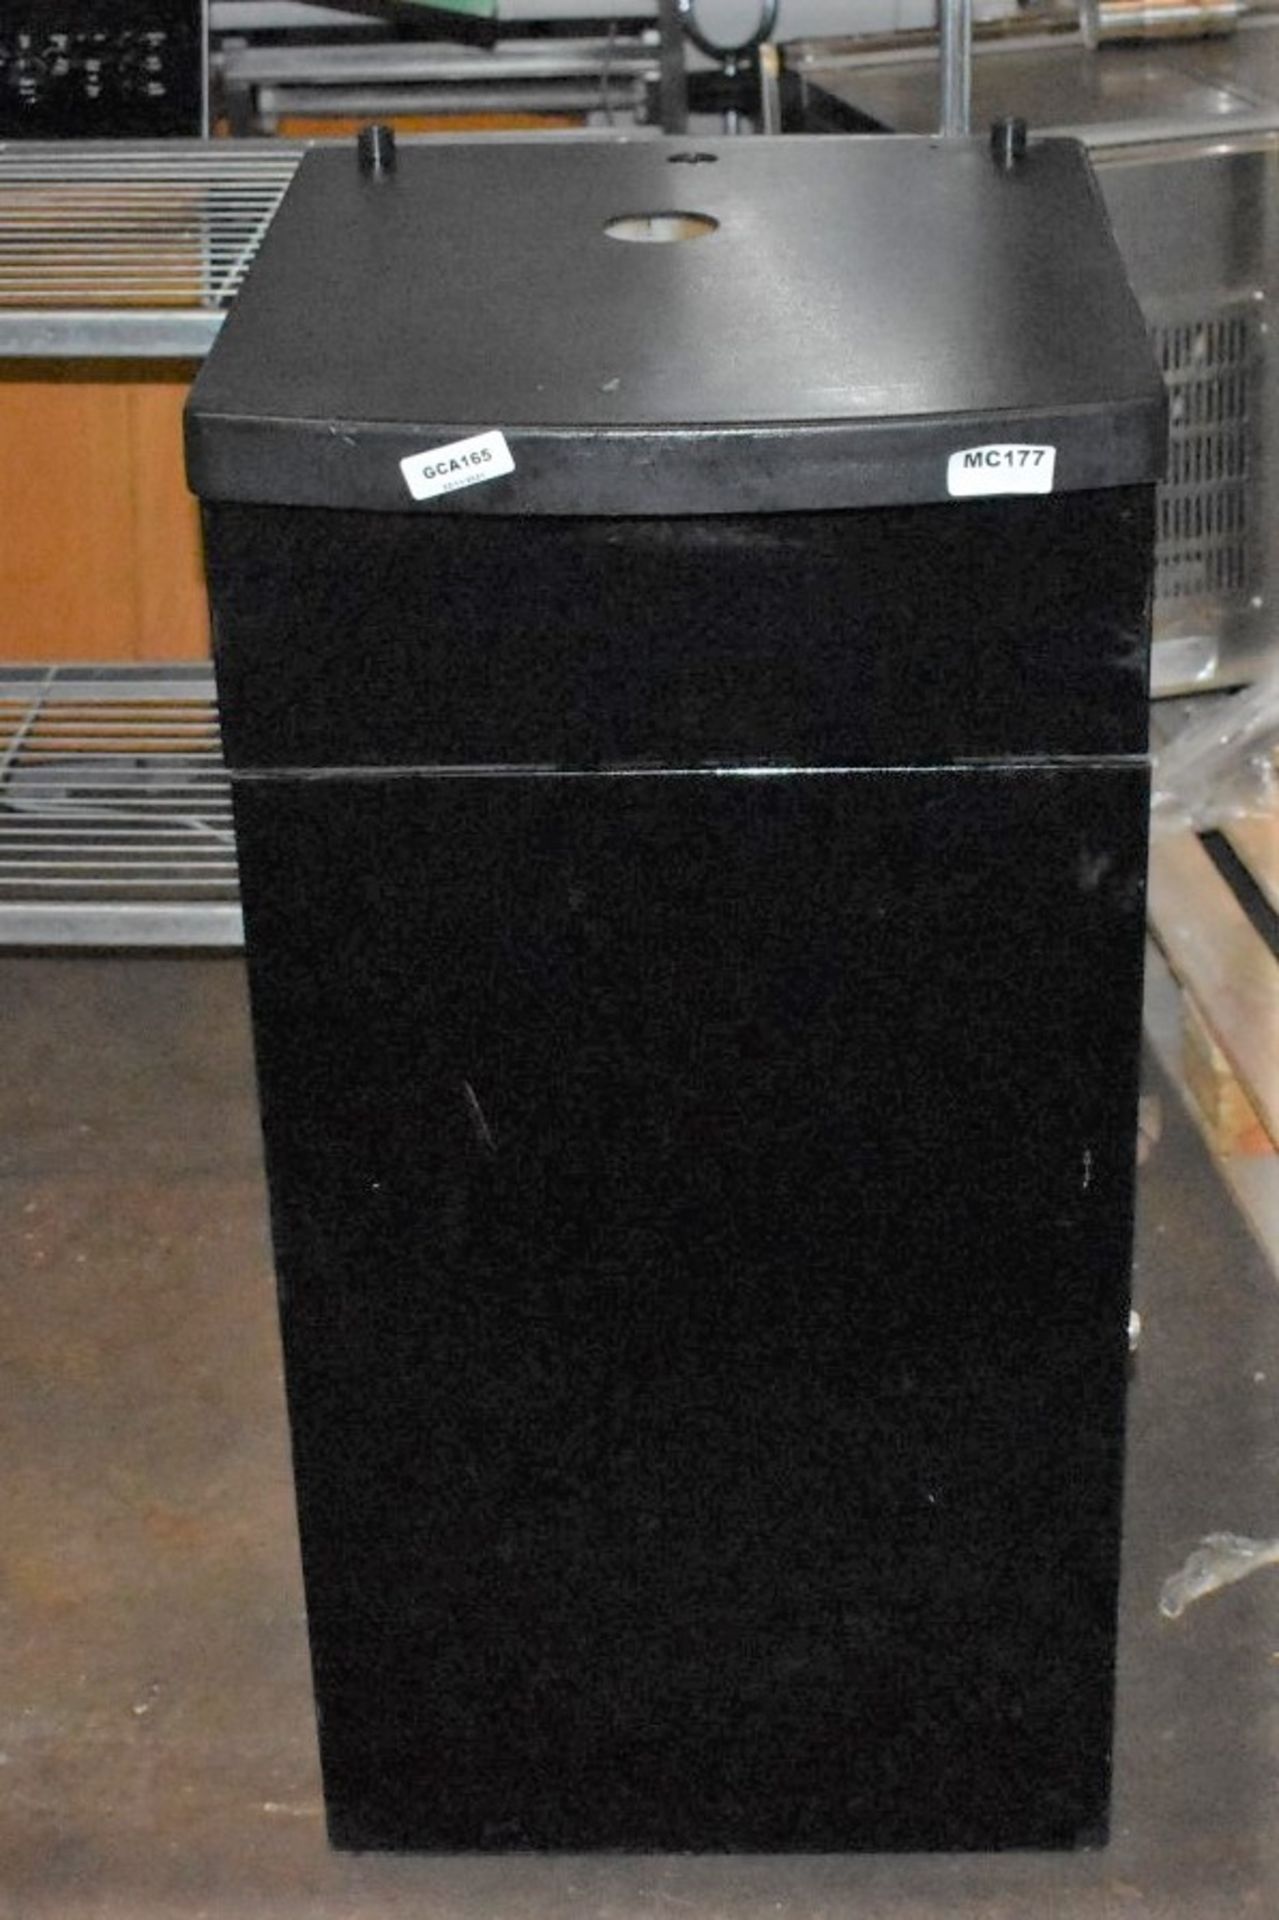 1 x Drinks Machine Cabinet in Black - Size H90 x W45 x D43 cms - CL011 - Ref GCA165 WH5 - - Image 7 of 8